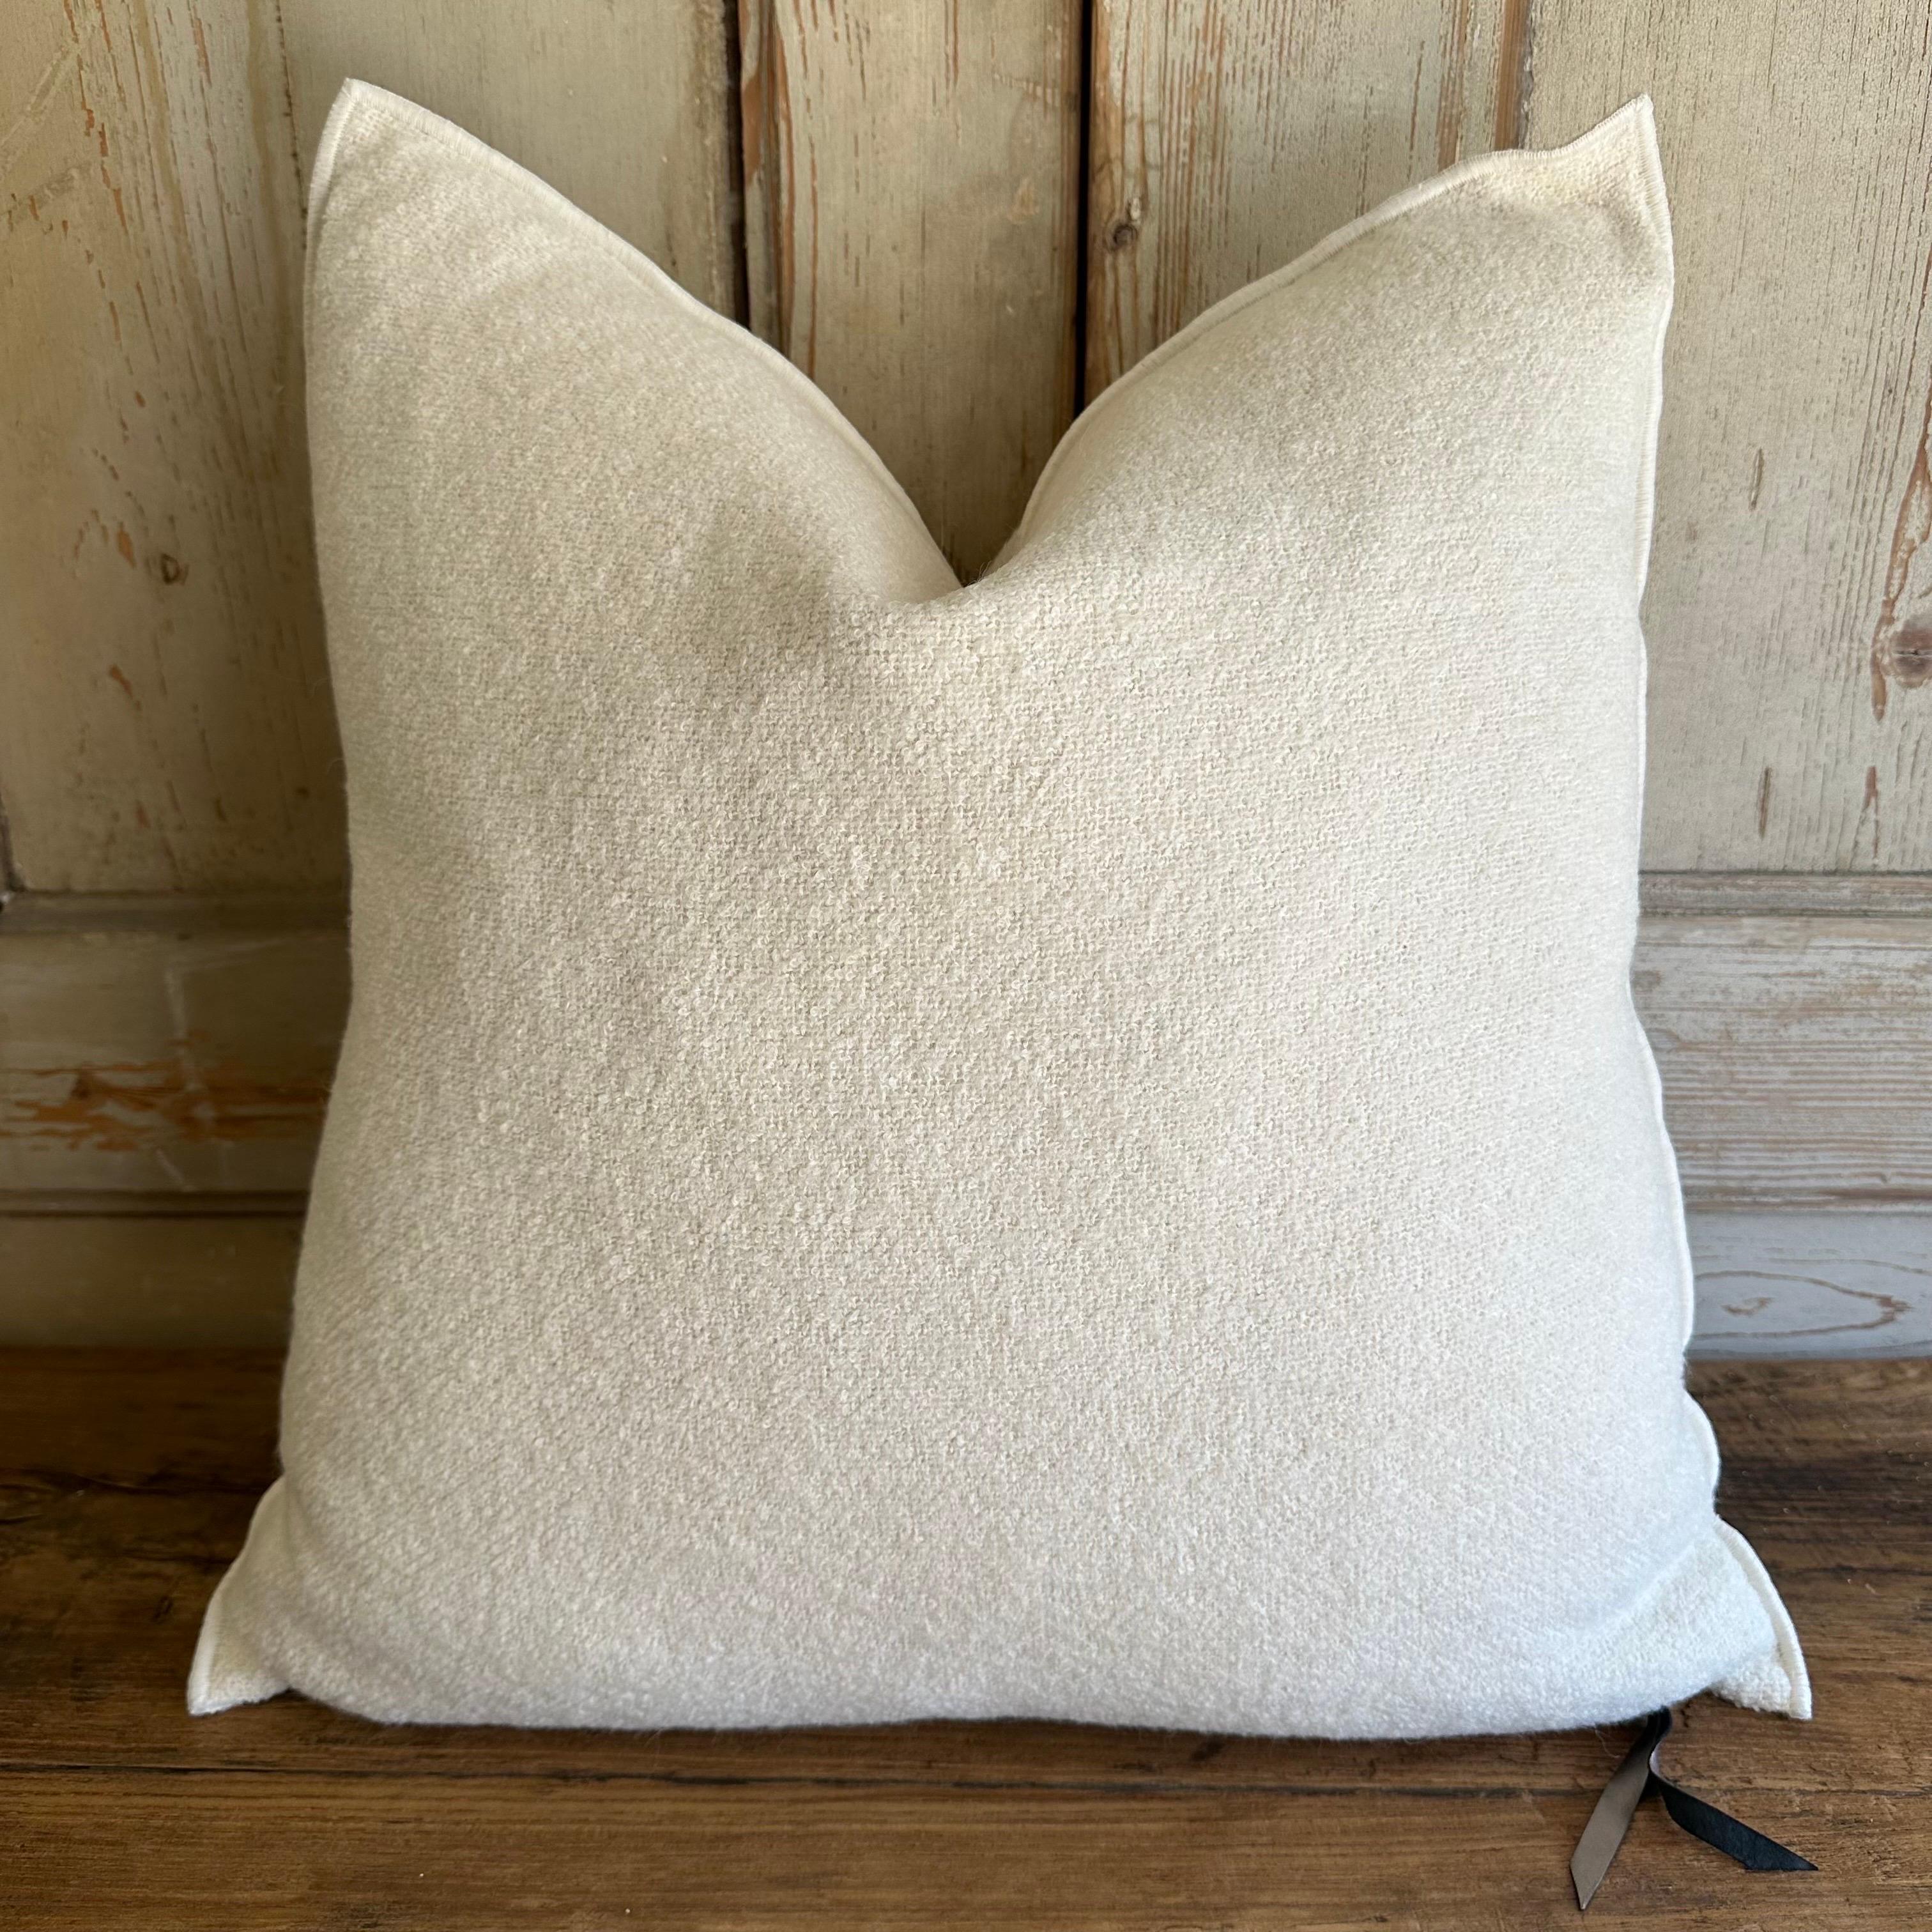 Bouclette French wool accent pillow.
Custom wool blend accent pillow with down insert 
Color: blanc, an off white colored nubby boucle style pillow with a stitched edge, metal zipper closure.
Size: 22” x 22”
Our pillows are constructed with